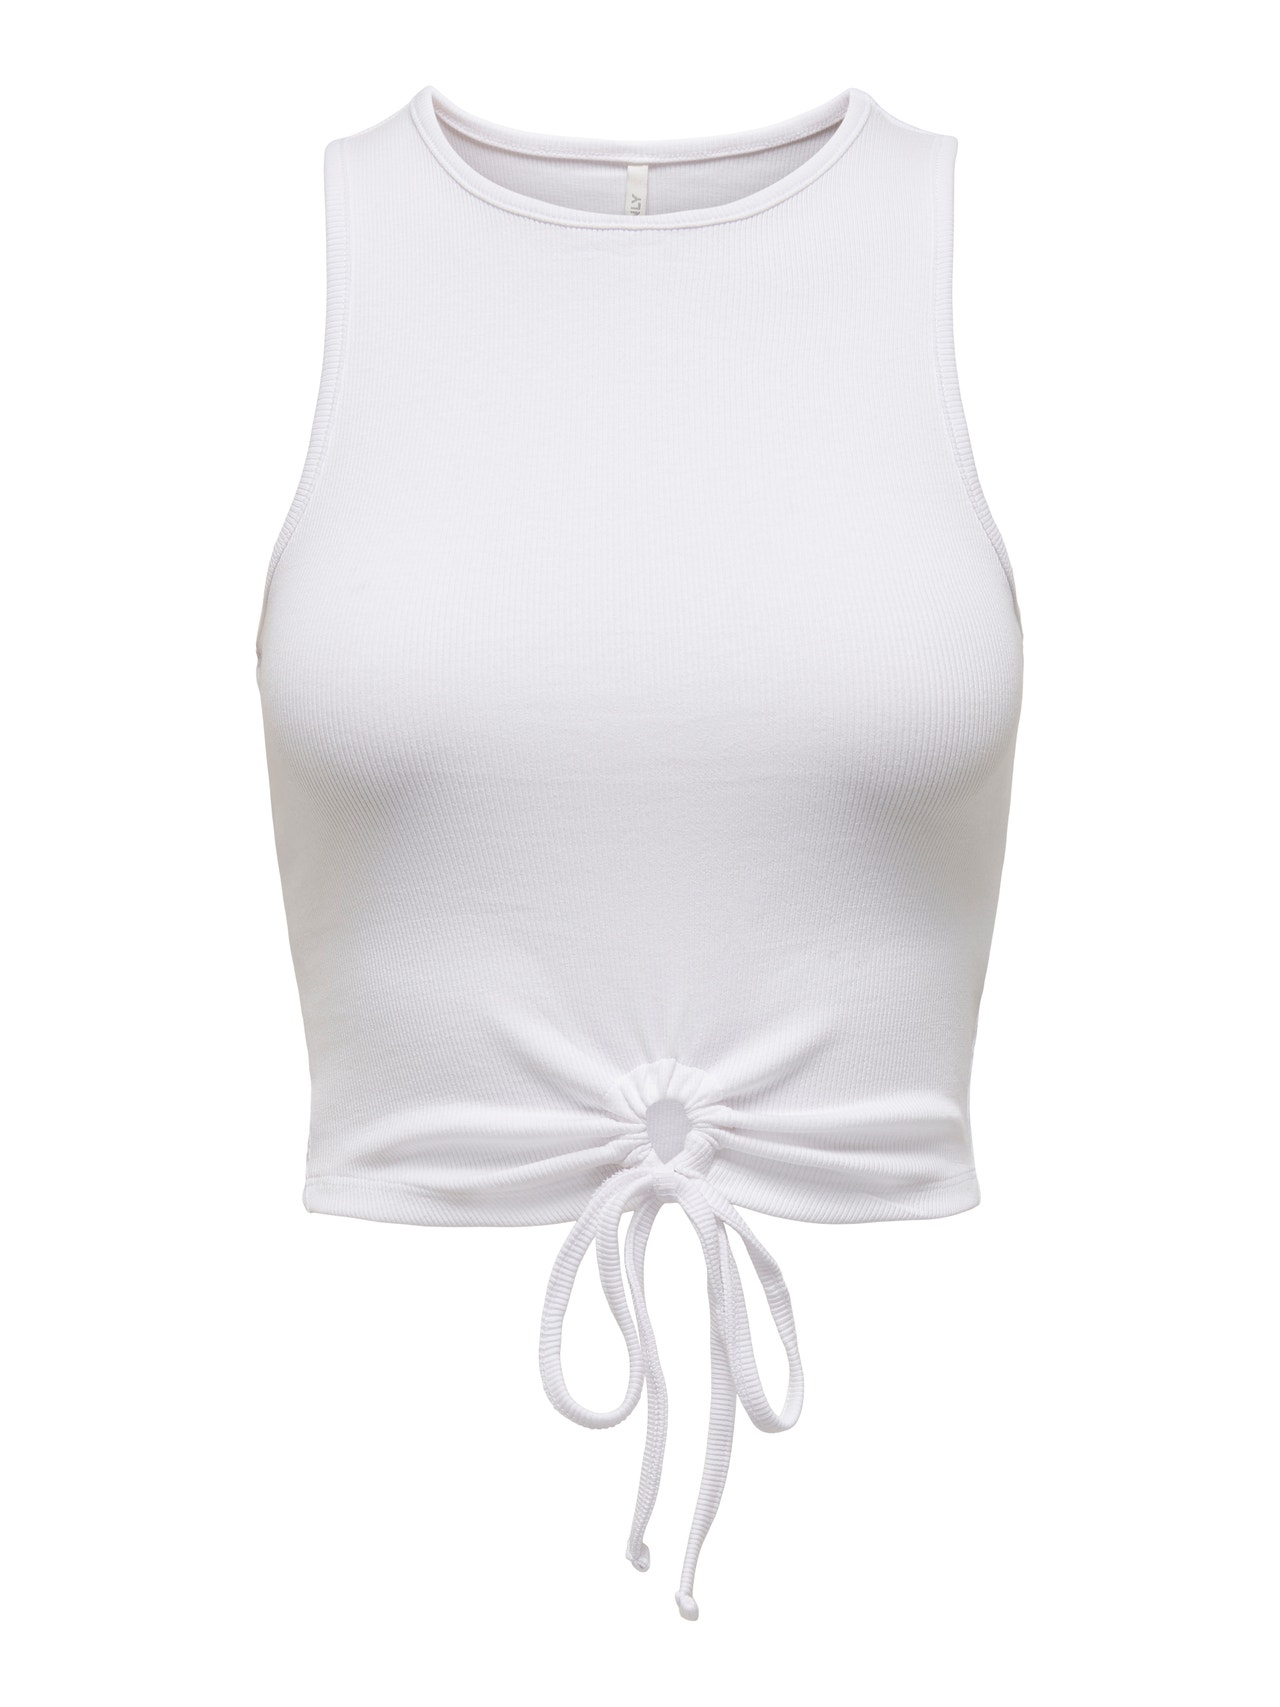 ONLY Cropped Detail Top -Bright White - 15294173